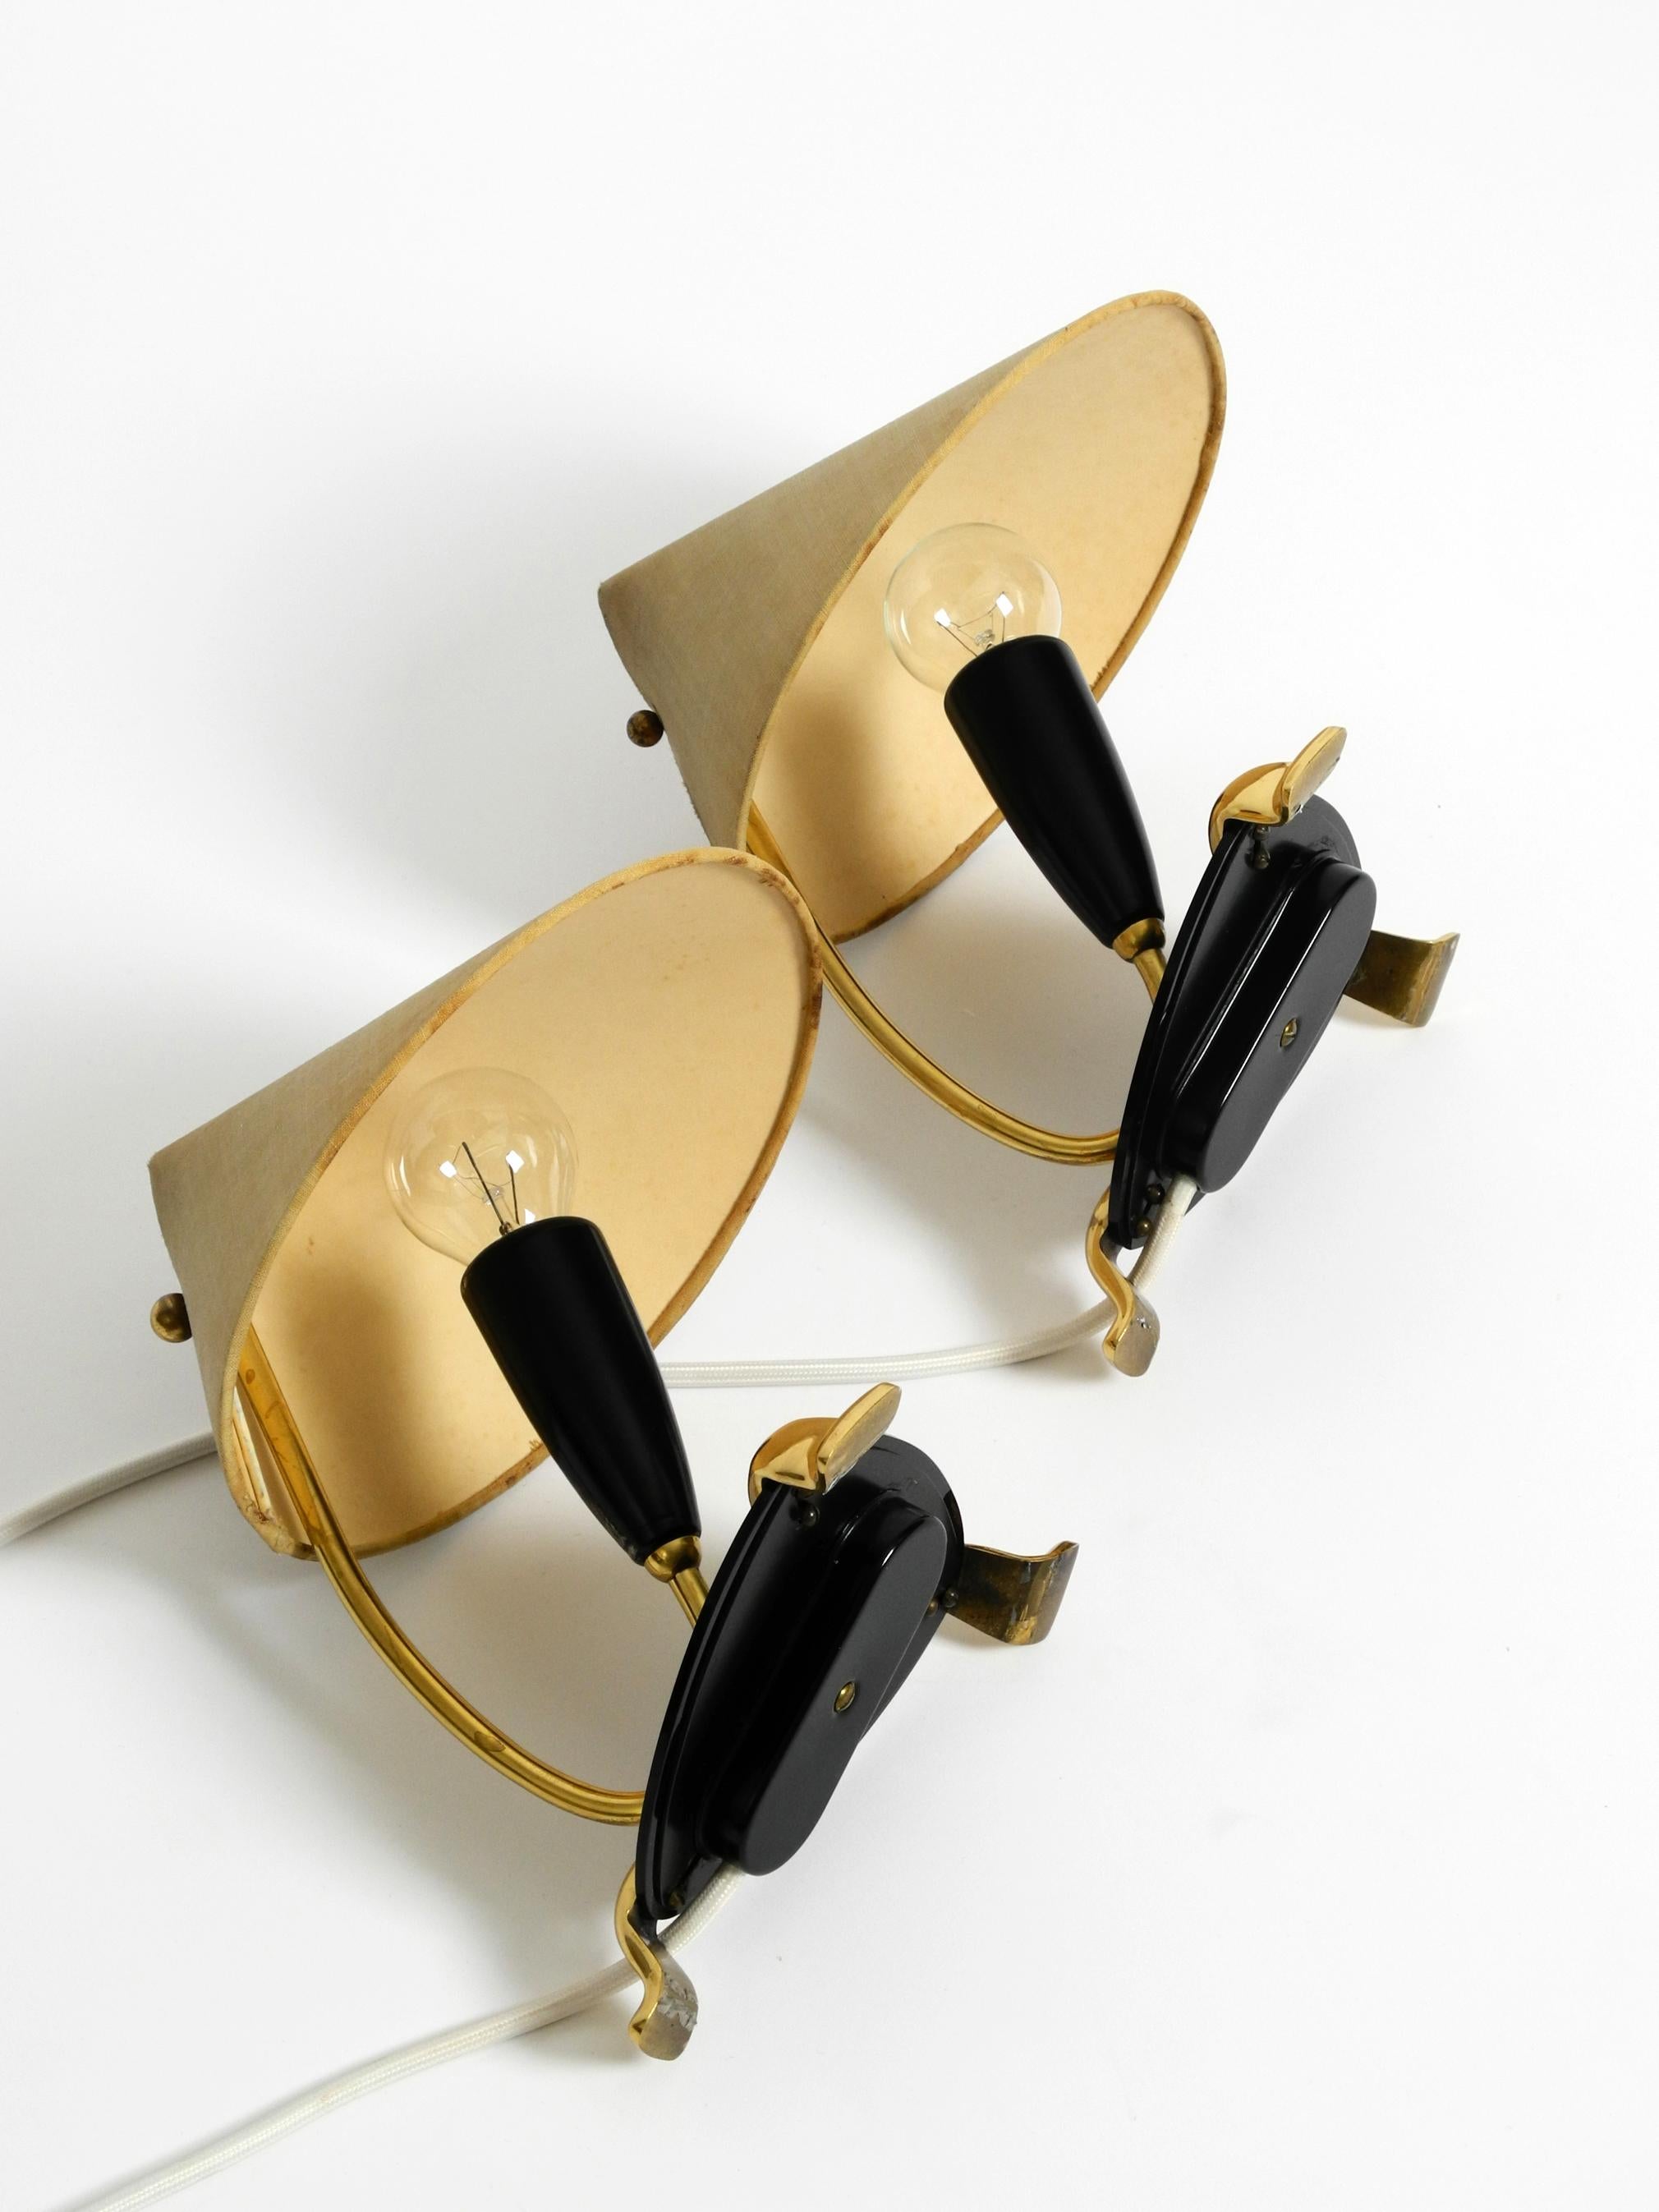 Pair of Midcentury Bedside Lamps Made of Brass and Plexiglass with Fabric Shades 5